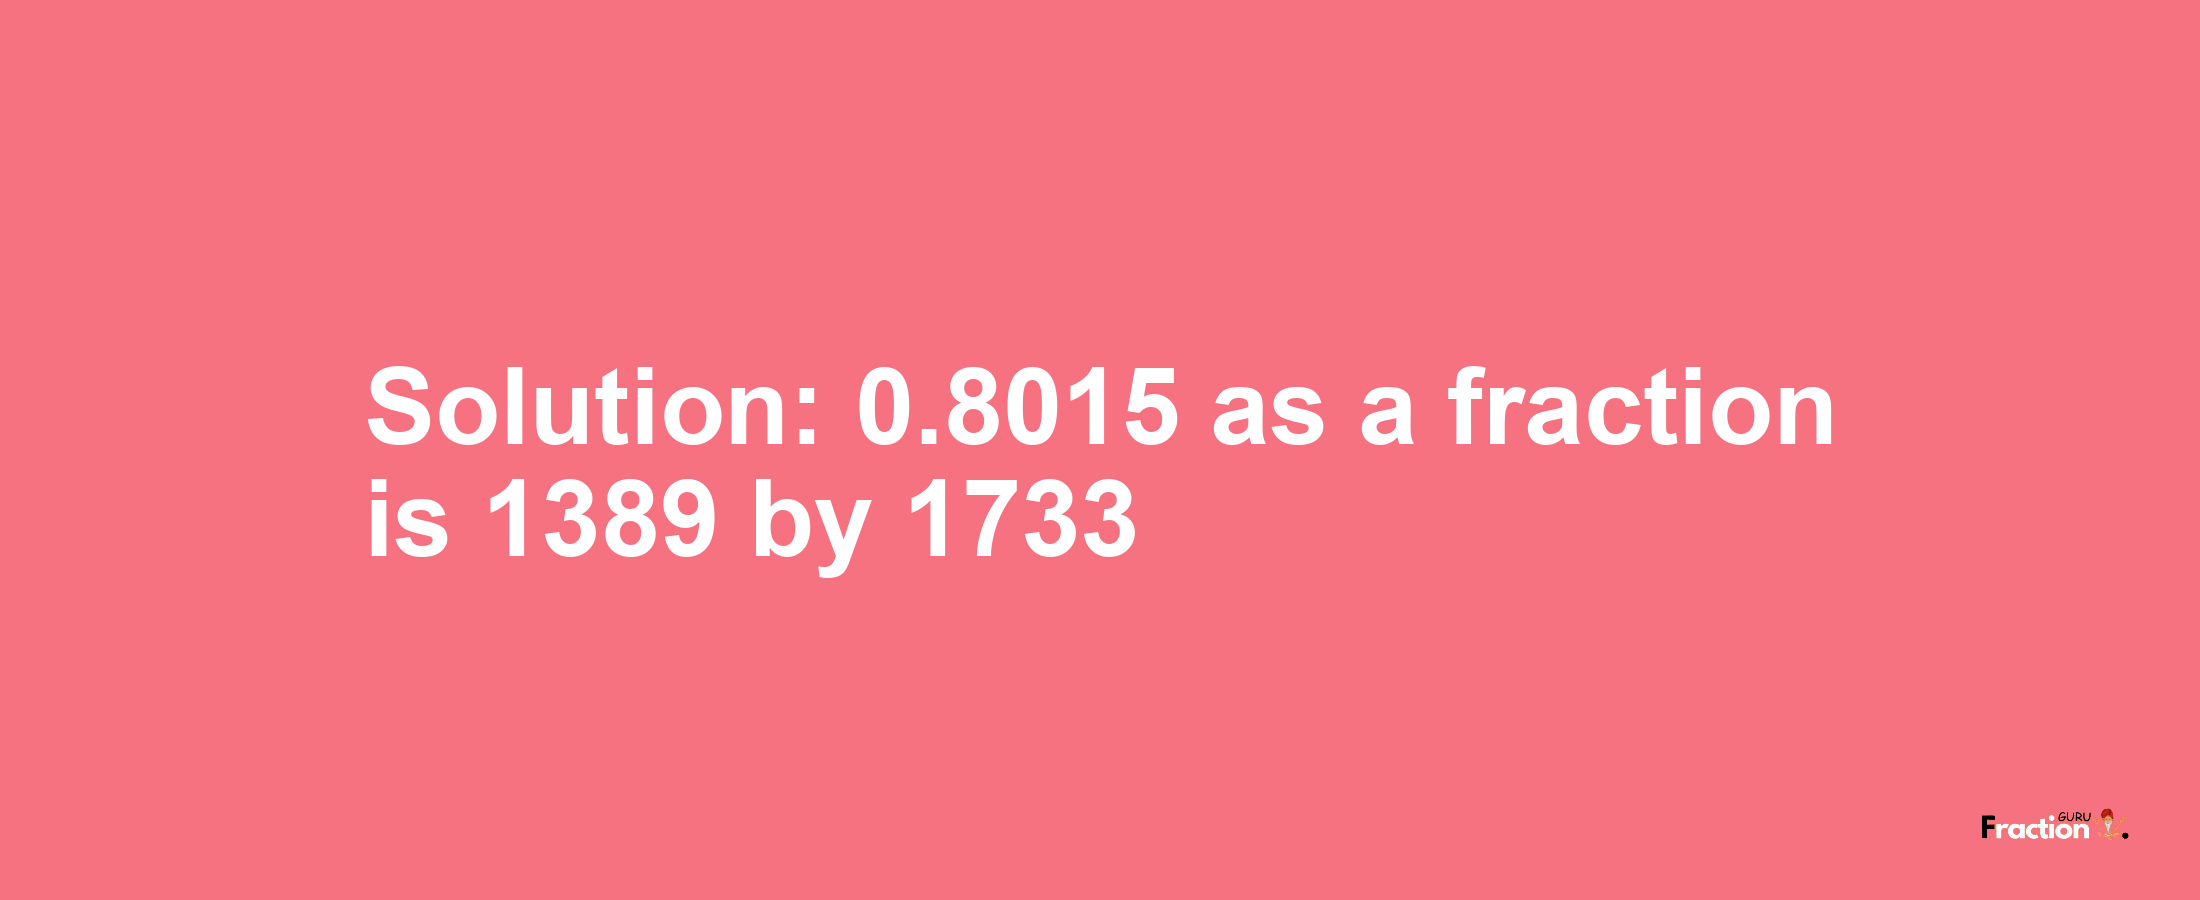 Solution:0.8015 as a fraction is 1389/1733